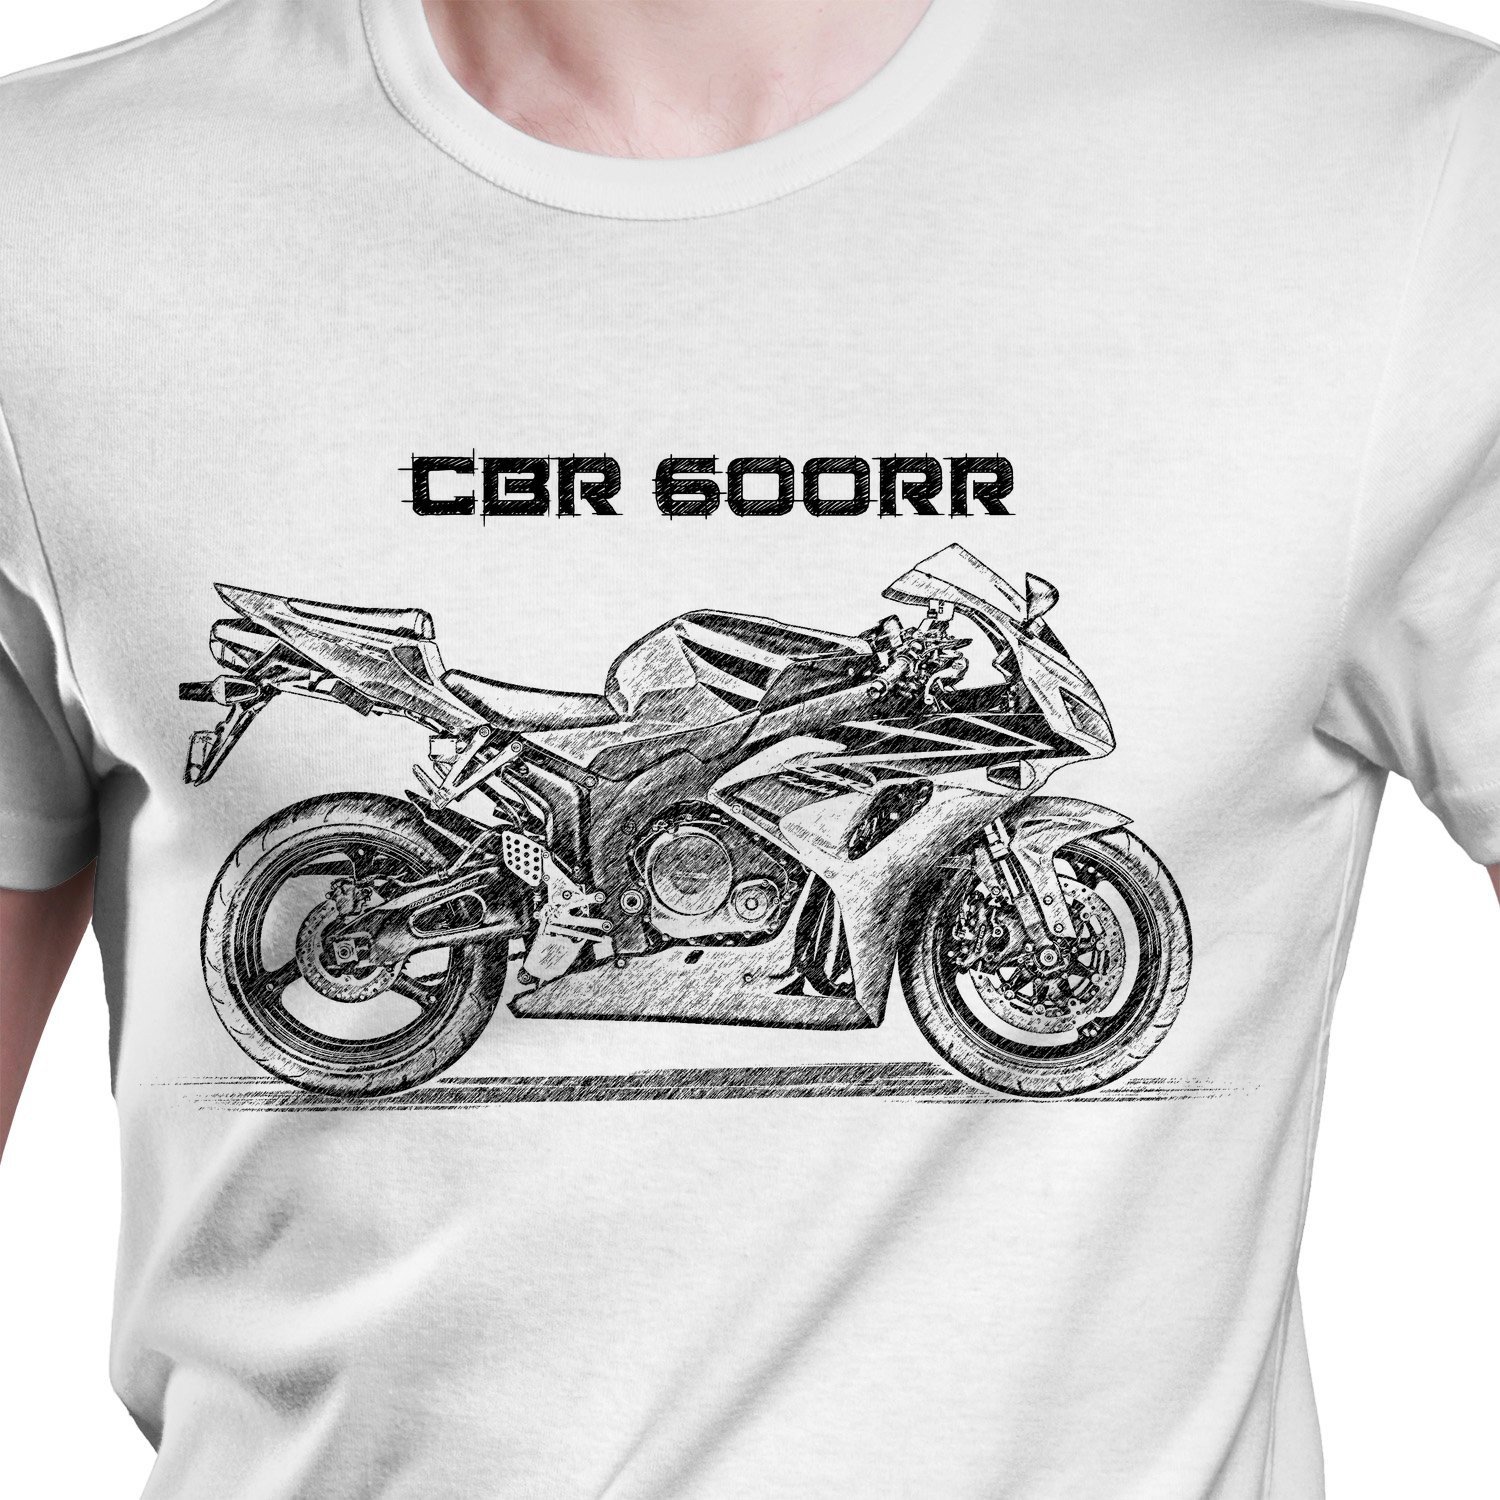 White T-shirt with Honda CBR 600RR. Gift for motorcyclist.